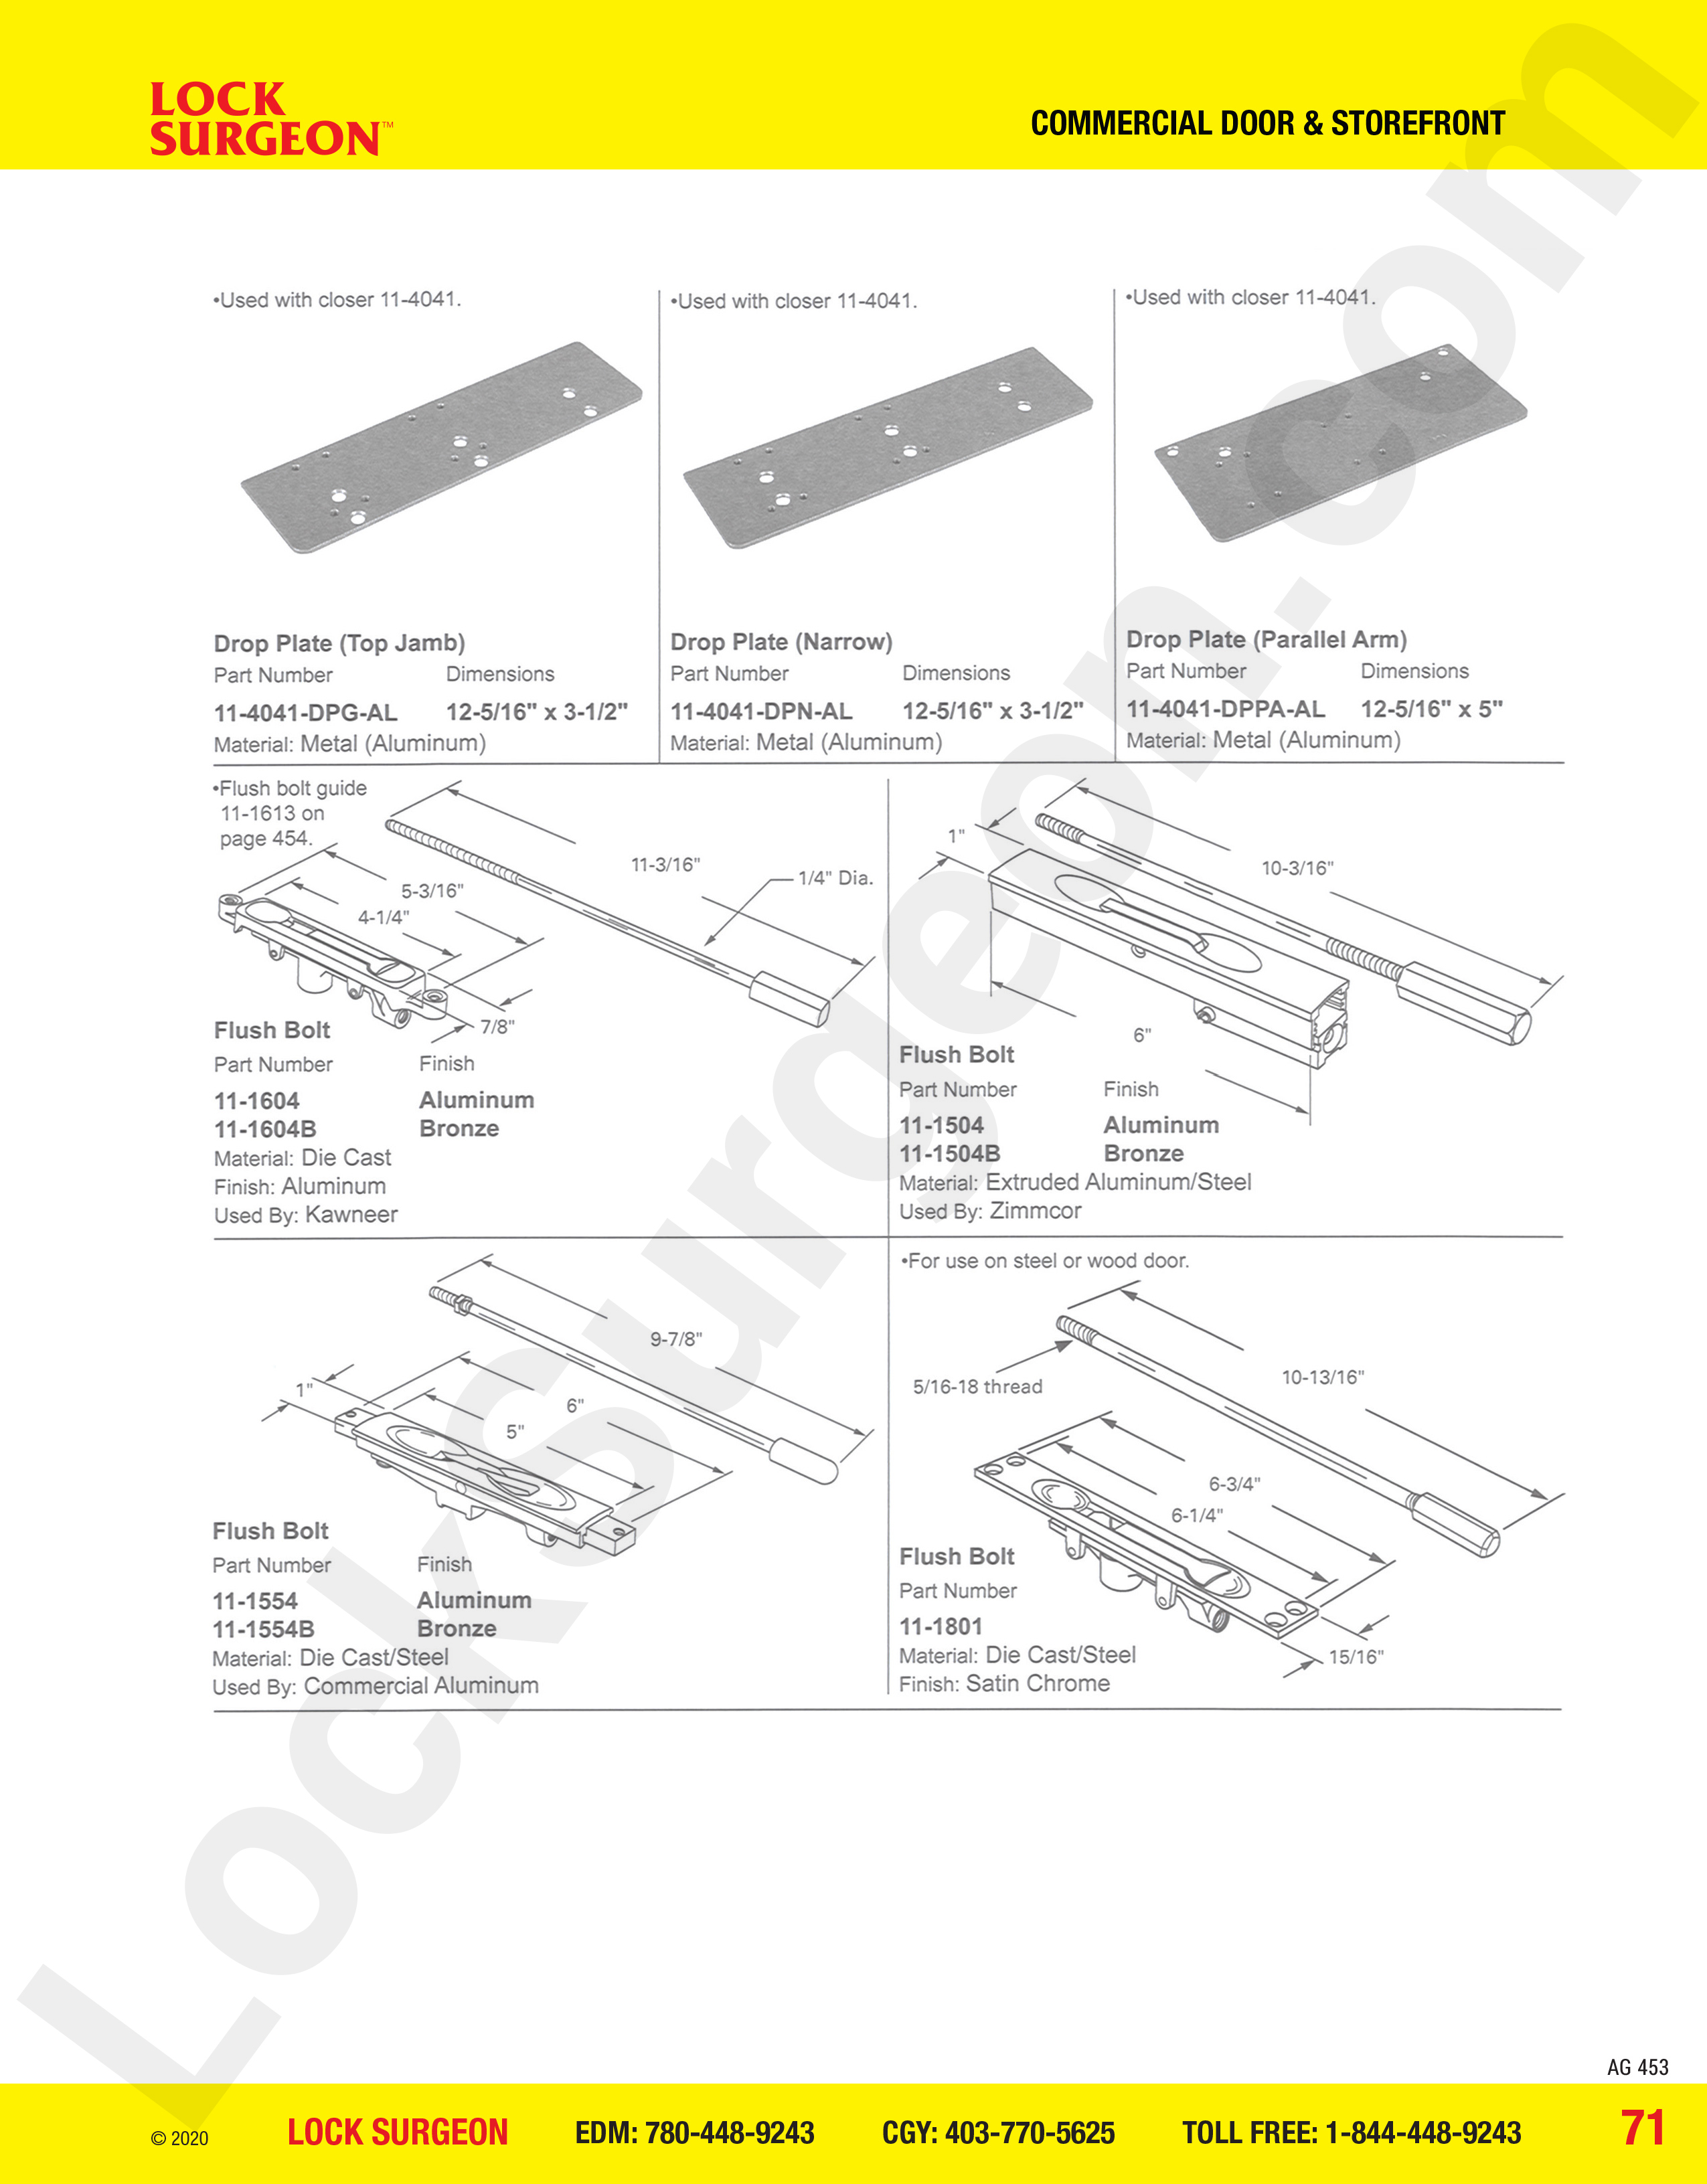 Commercial Door and Storefront parts for flush bolts